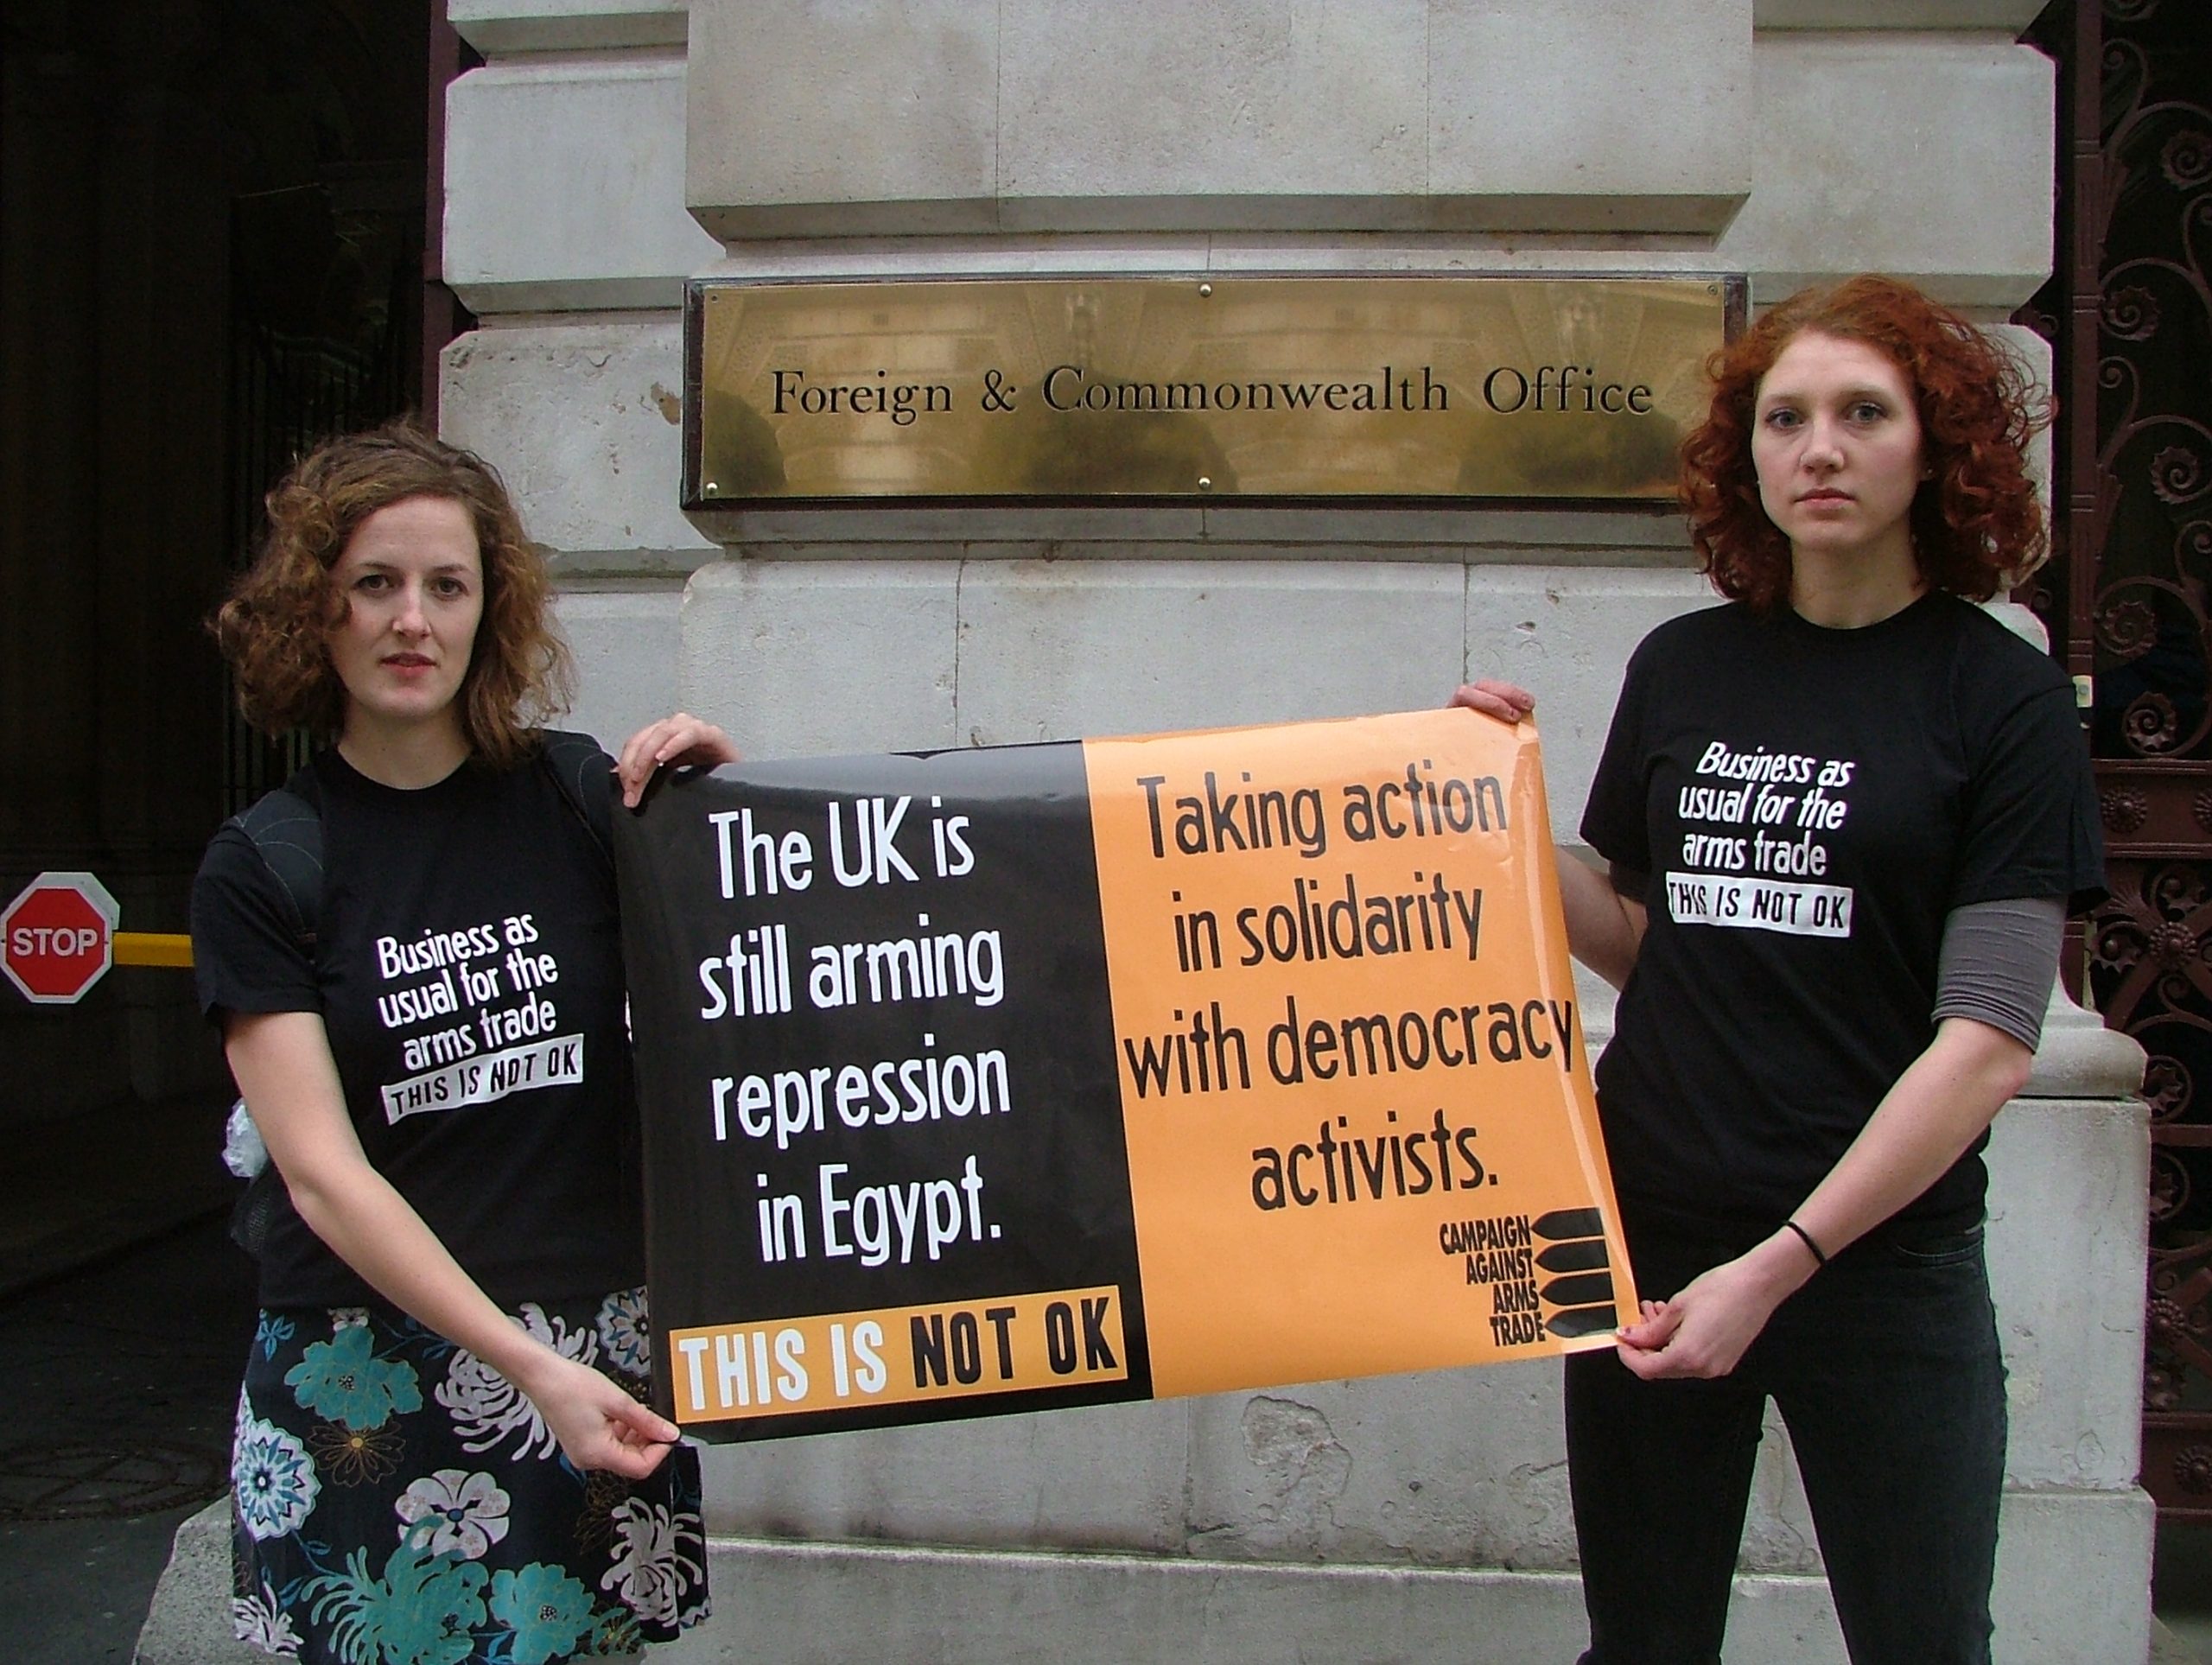 Campaigners stand out Foreign Office with banner saying UK is still arming repression in Egypt